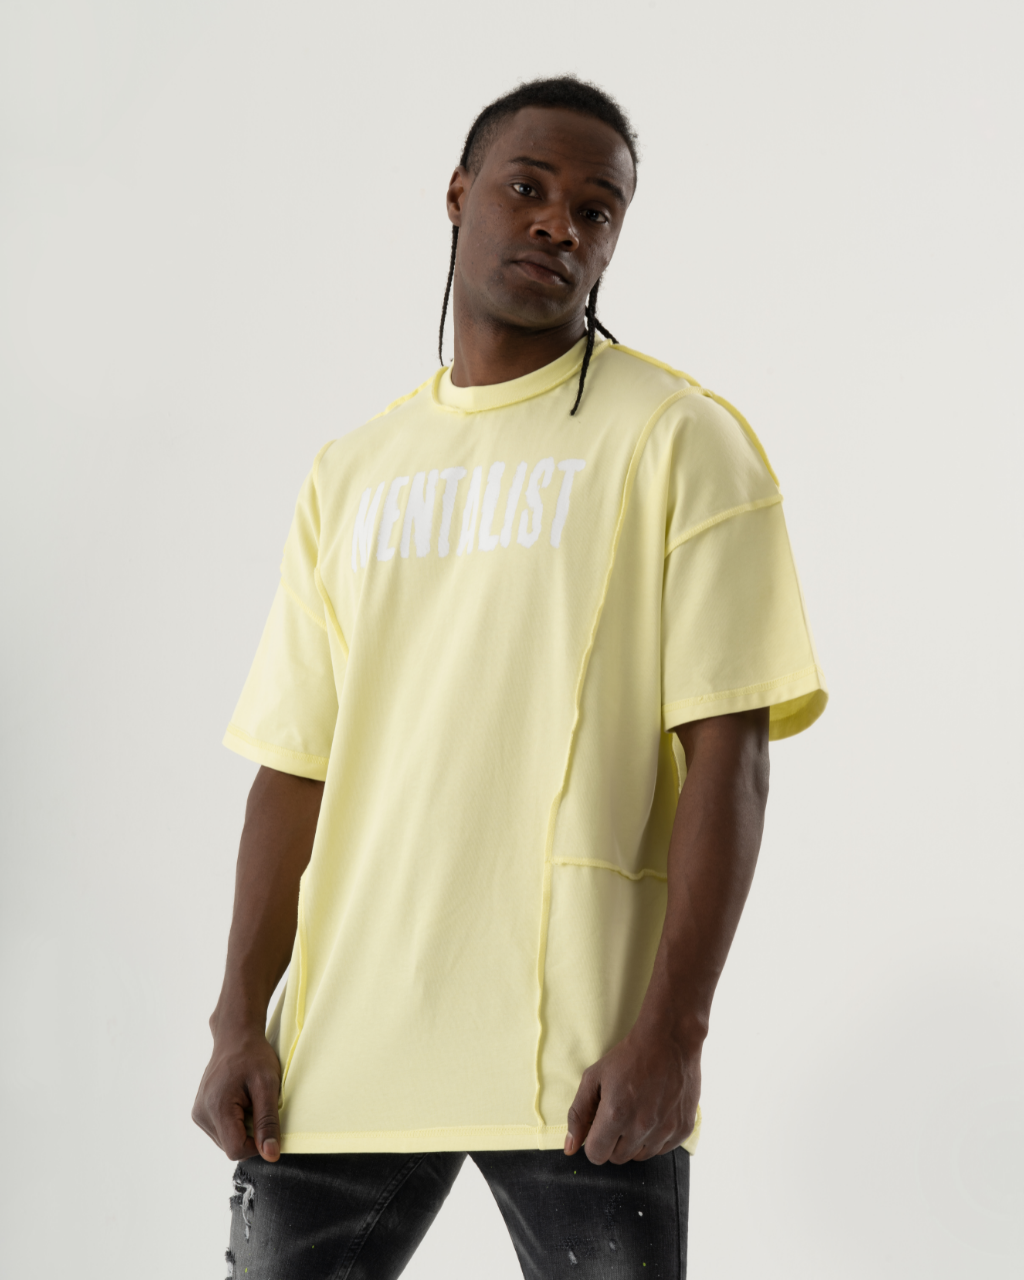 A man wearing a summery yellow MENTALIST T-SHIRT | LIME and casual jeans.